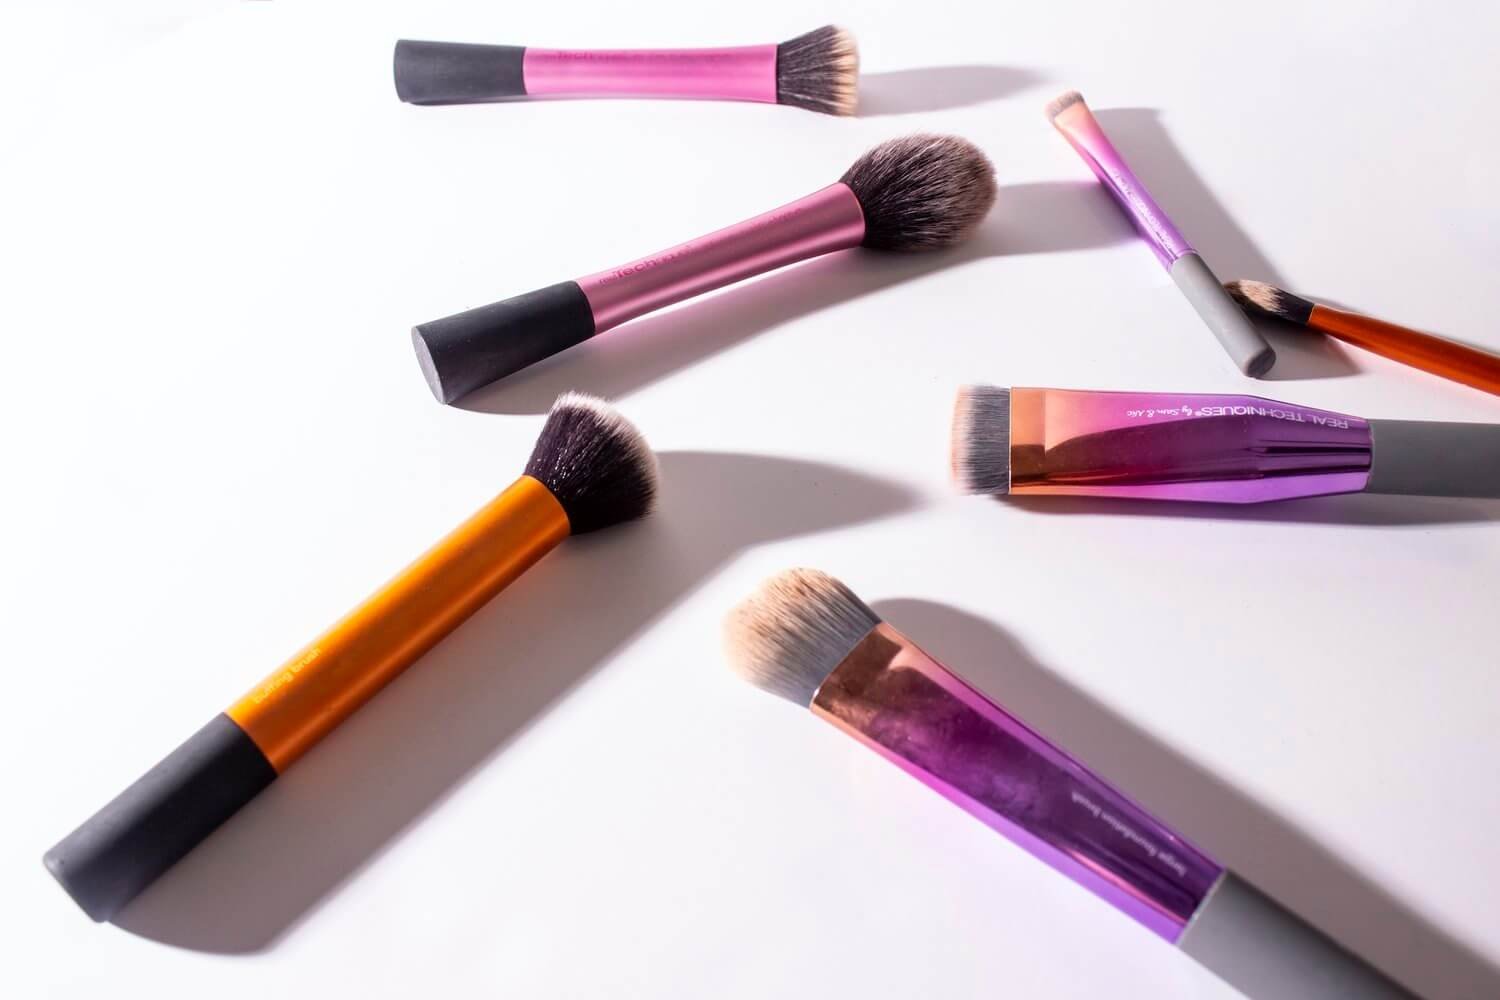 What other sustainable materials are brushes made of?